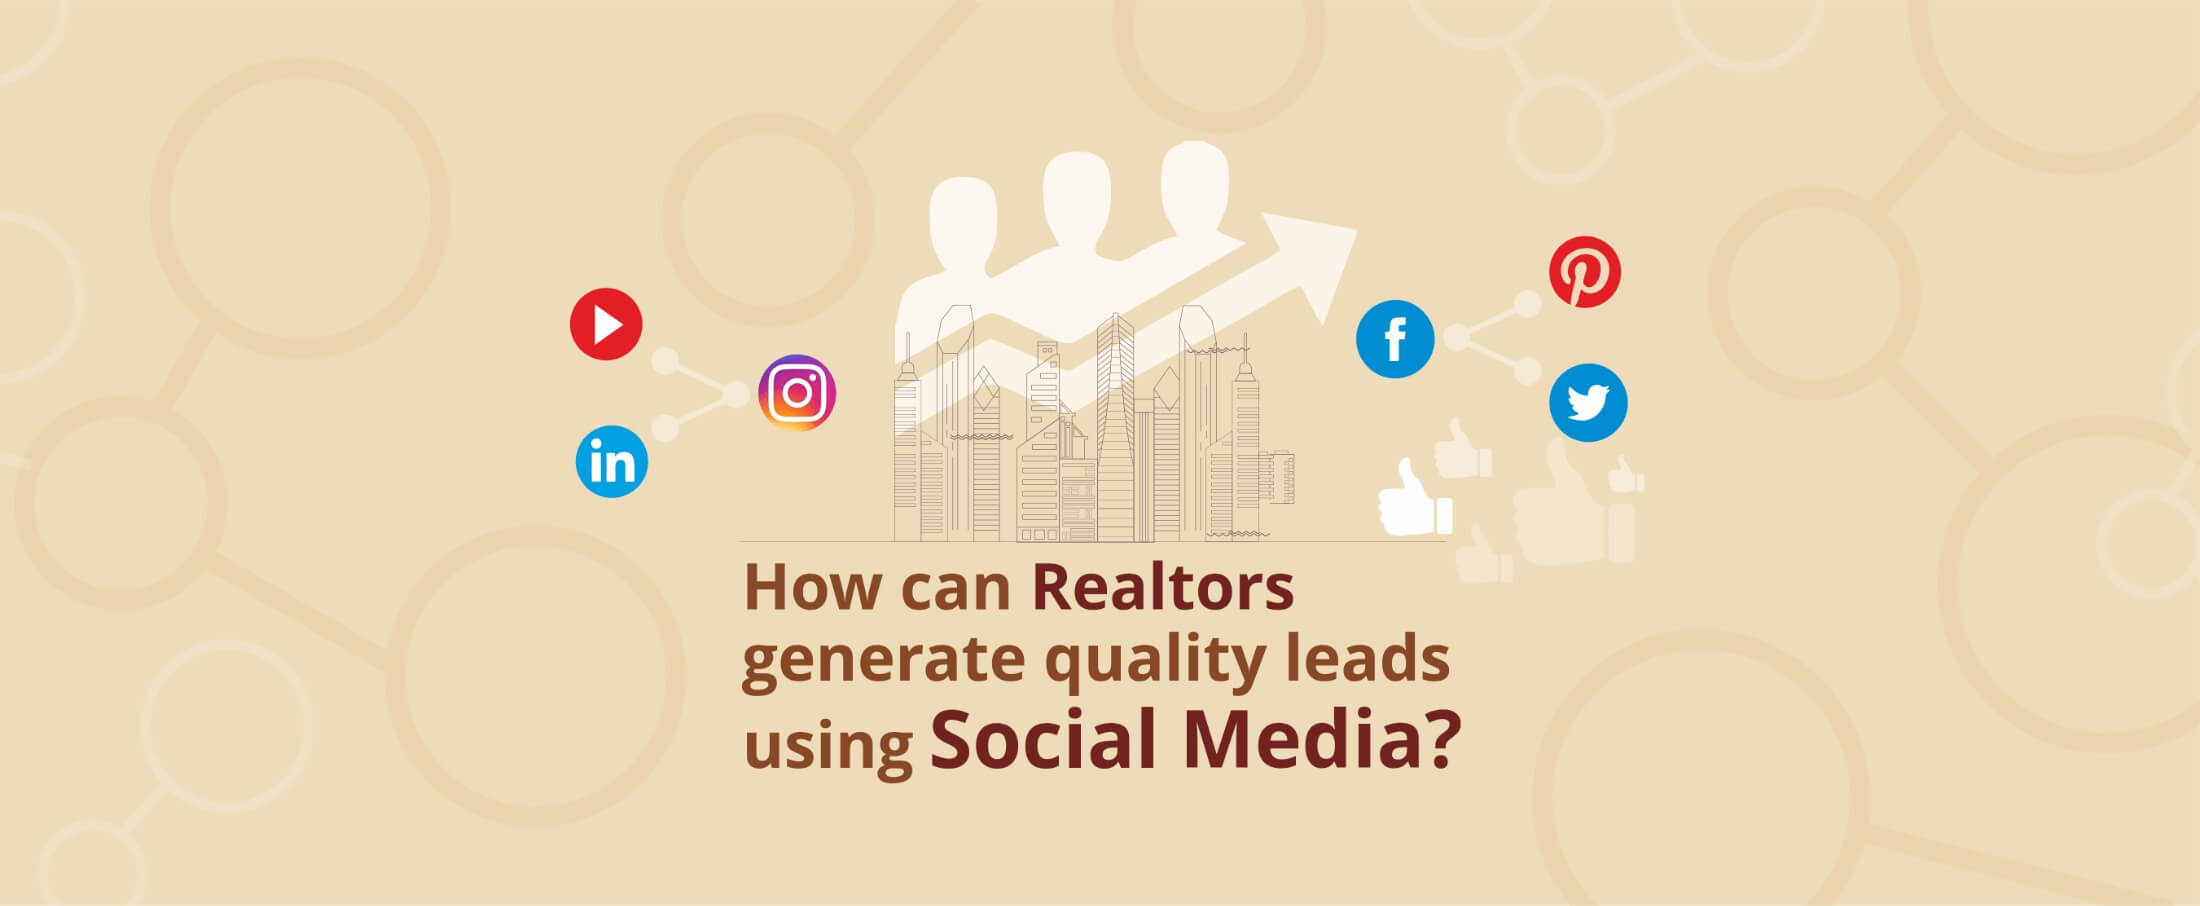 How can Realtors generate quality leads using Social Media